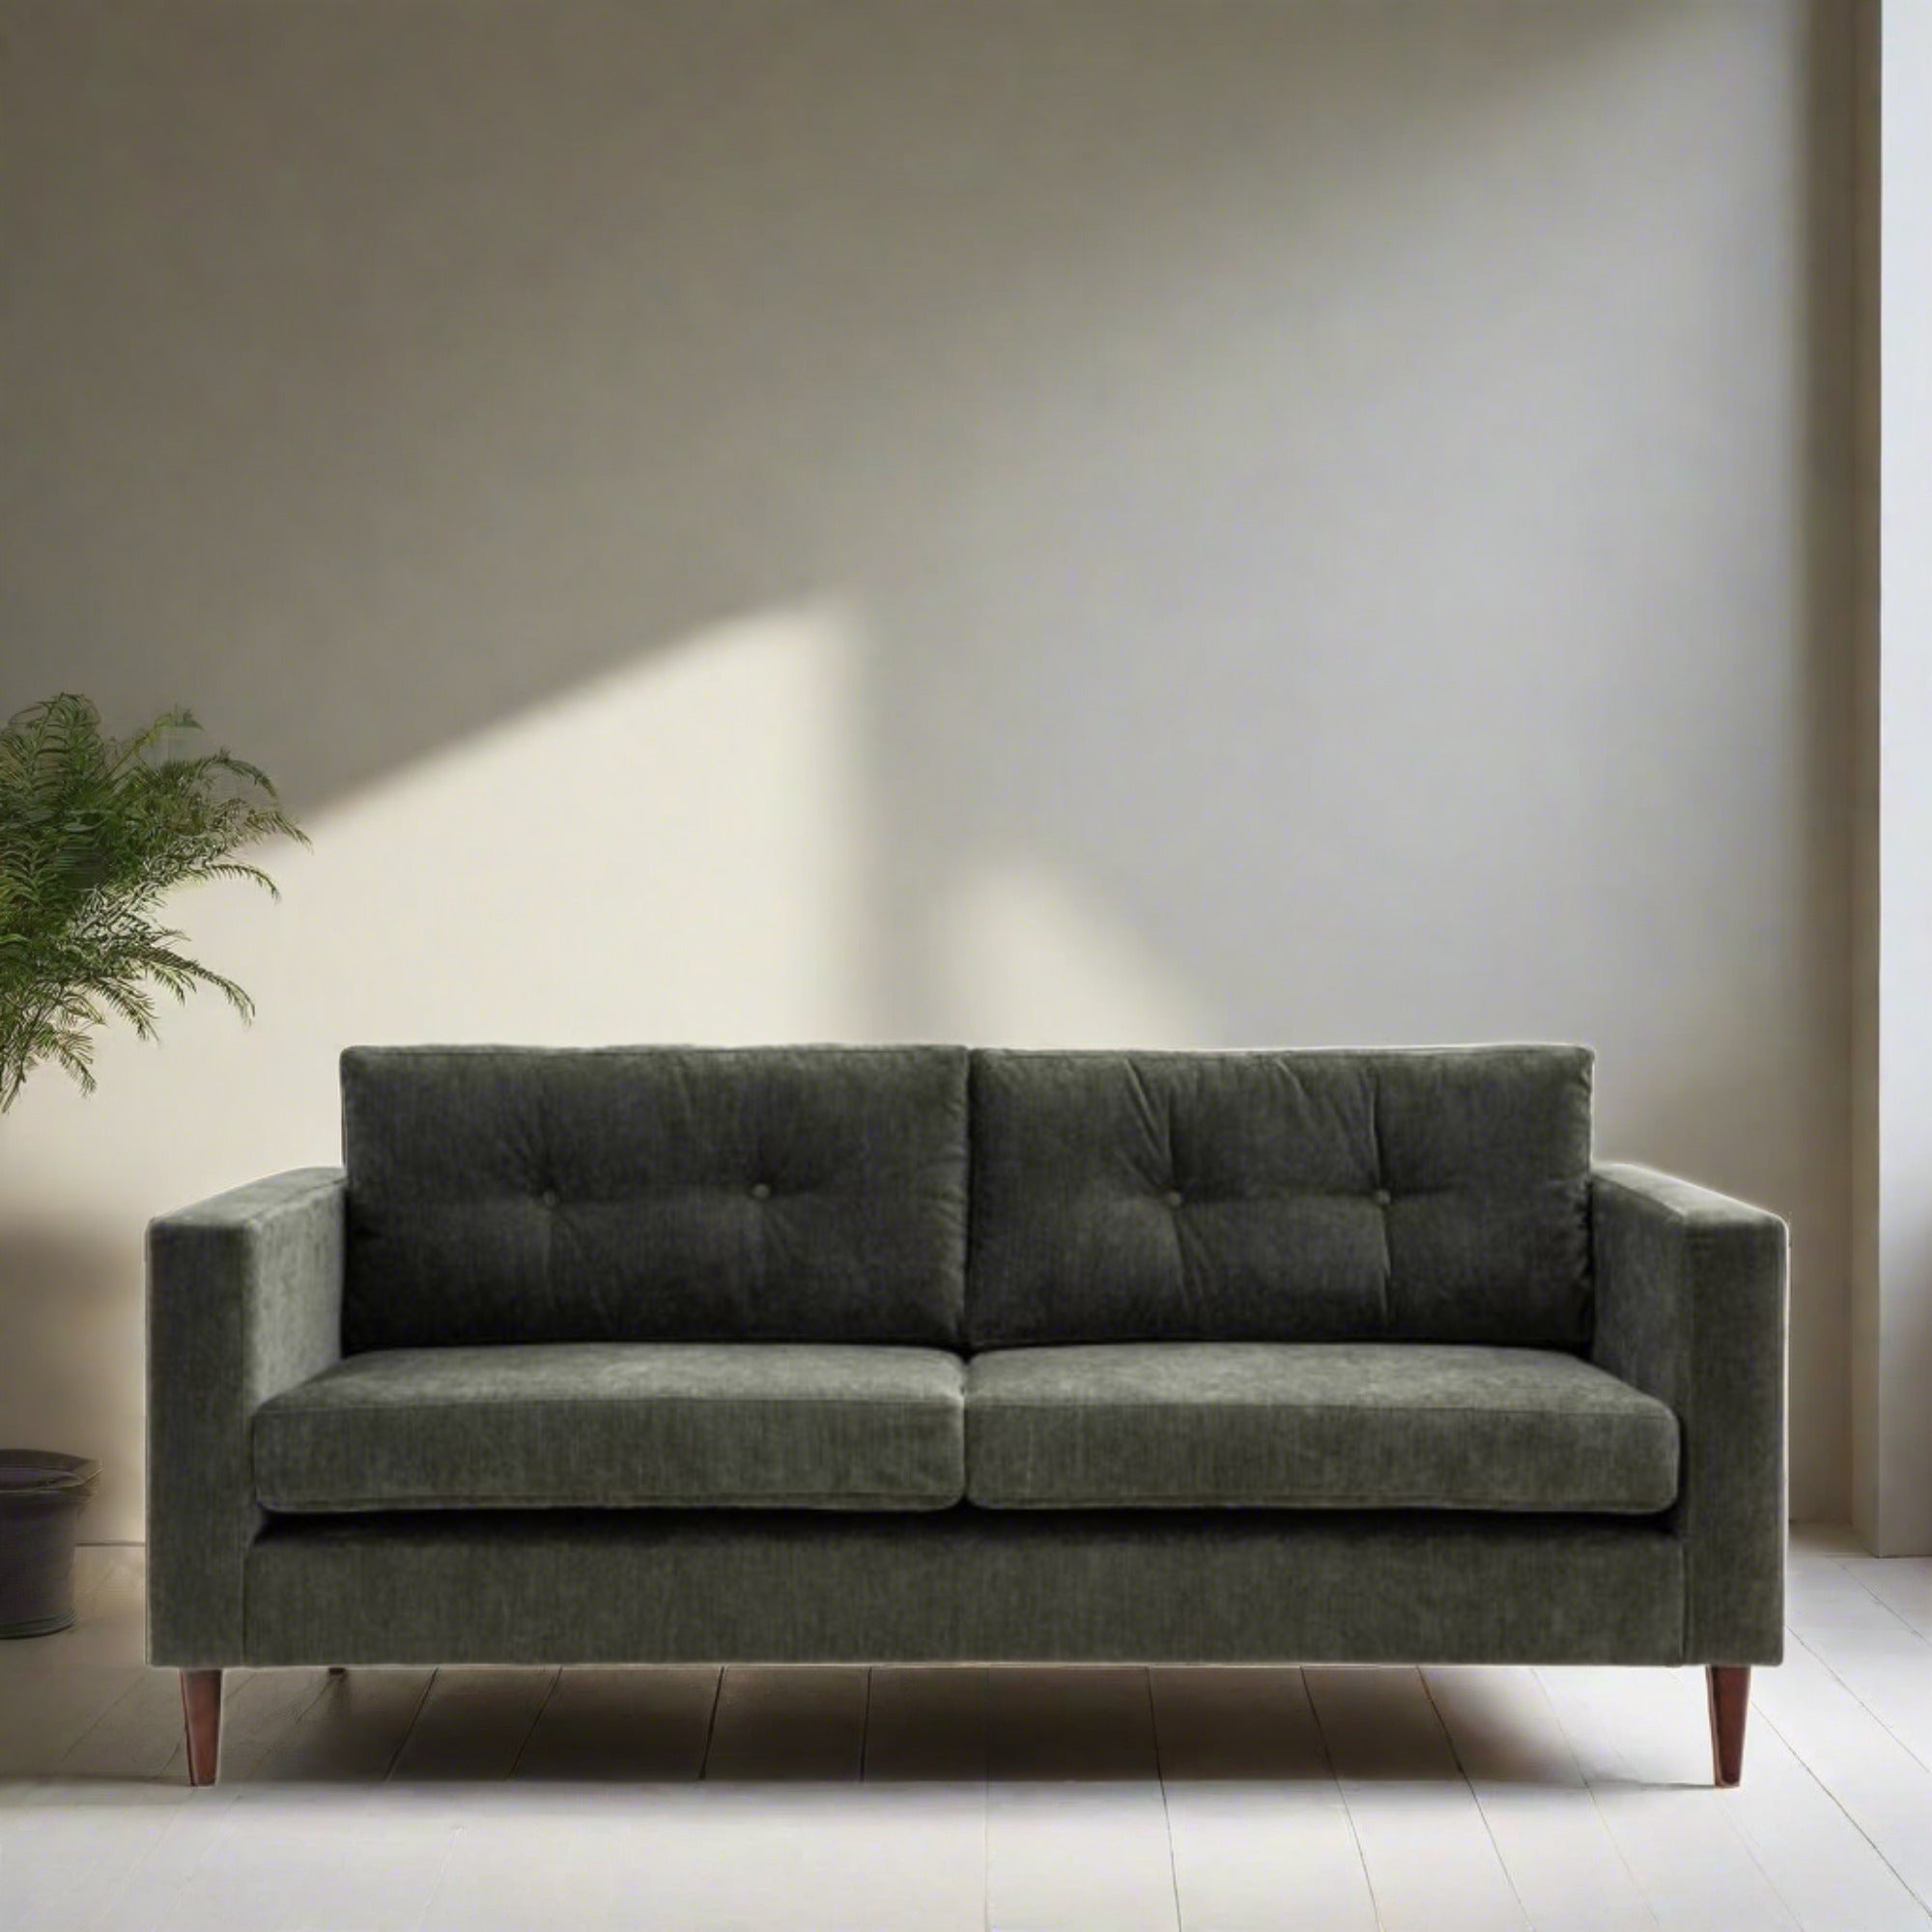 Chelsea contemporary 3 seat sofa in a choice of 3 colours with elegant tapered wooden feet | malletandplane.com